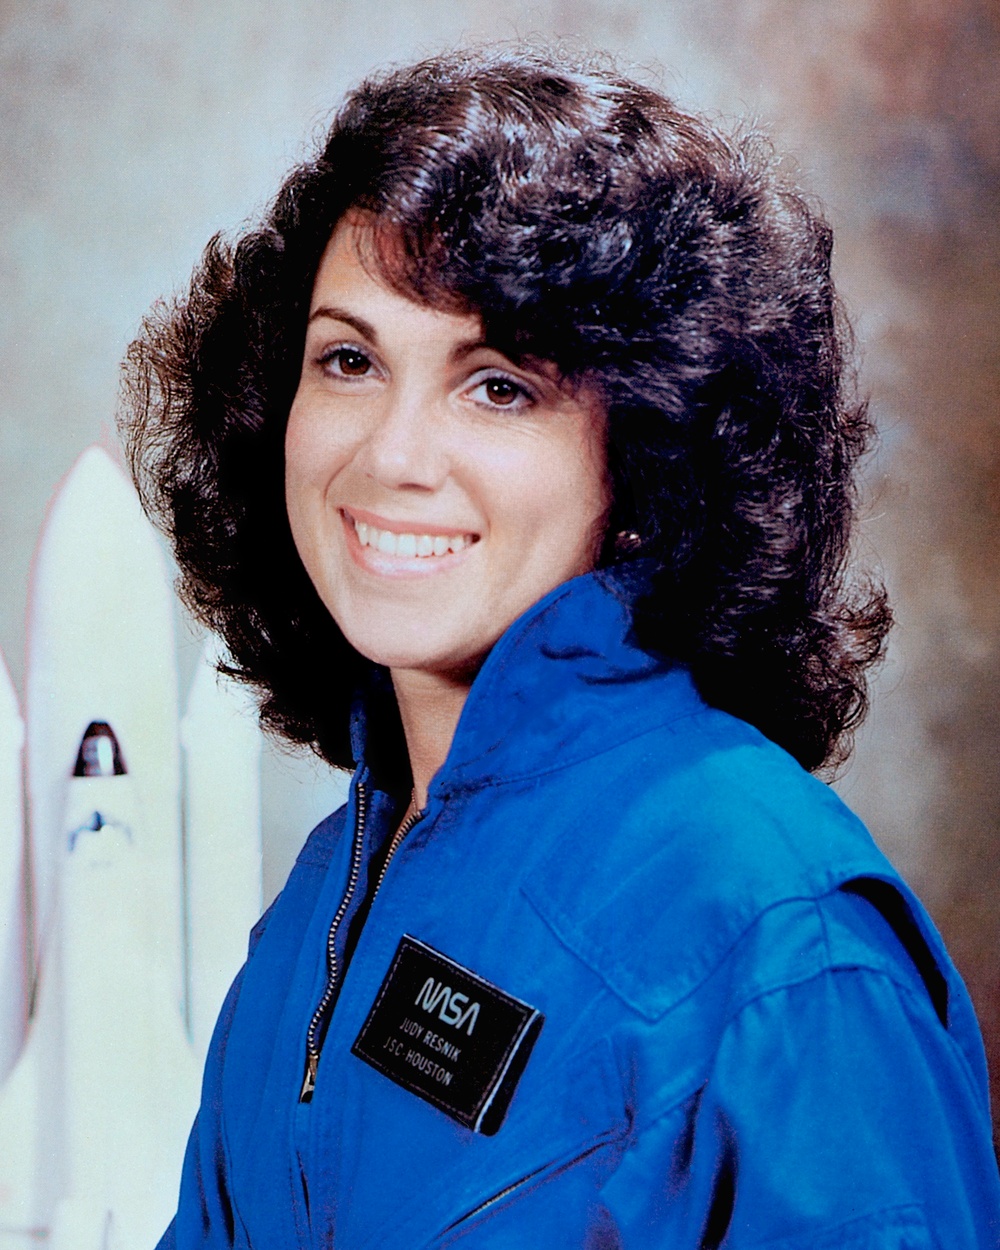 FEMALE ASTRONAUT CANDIDATES - JUDITH A RESNICK